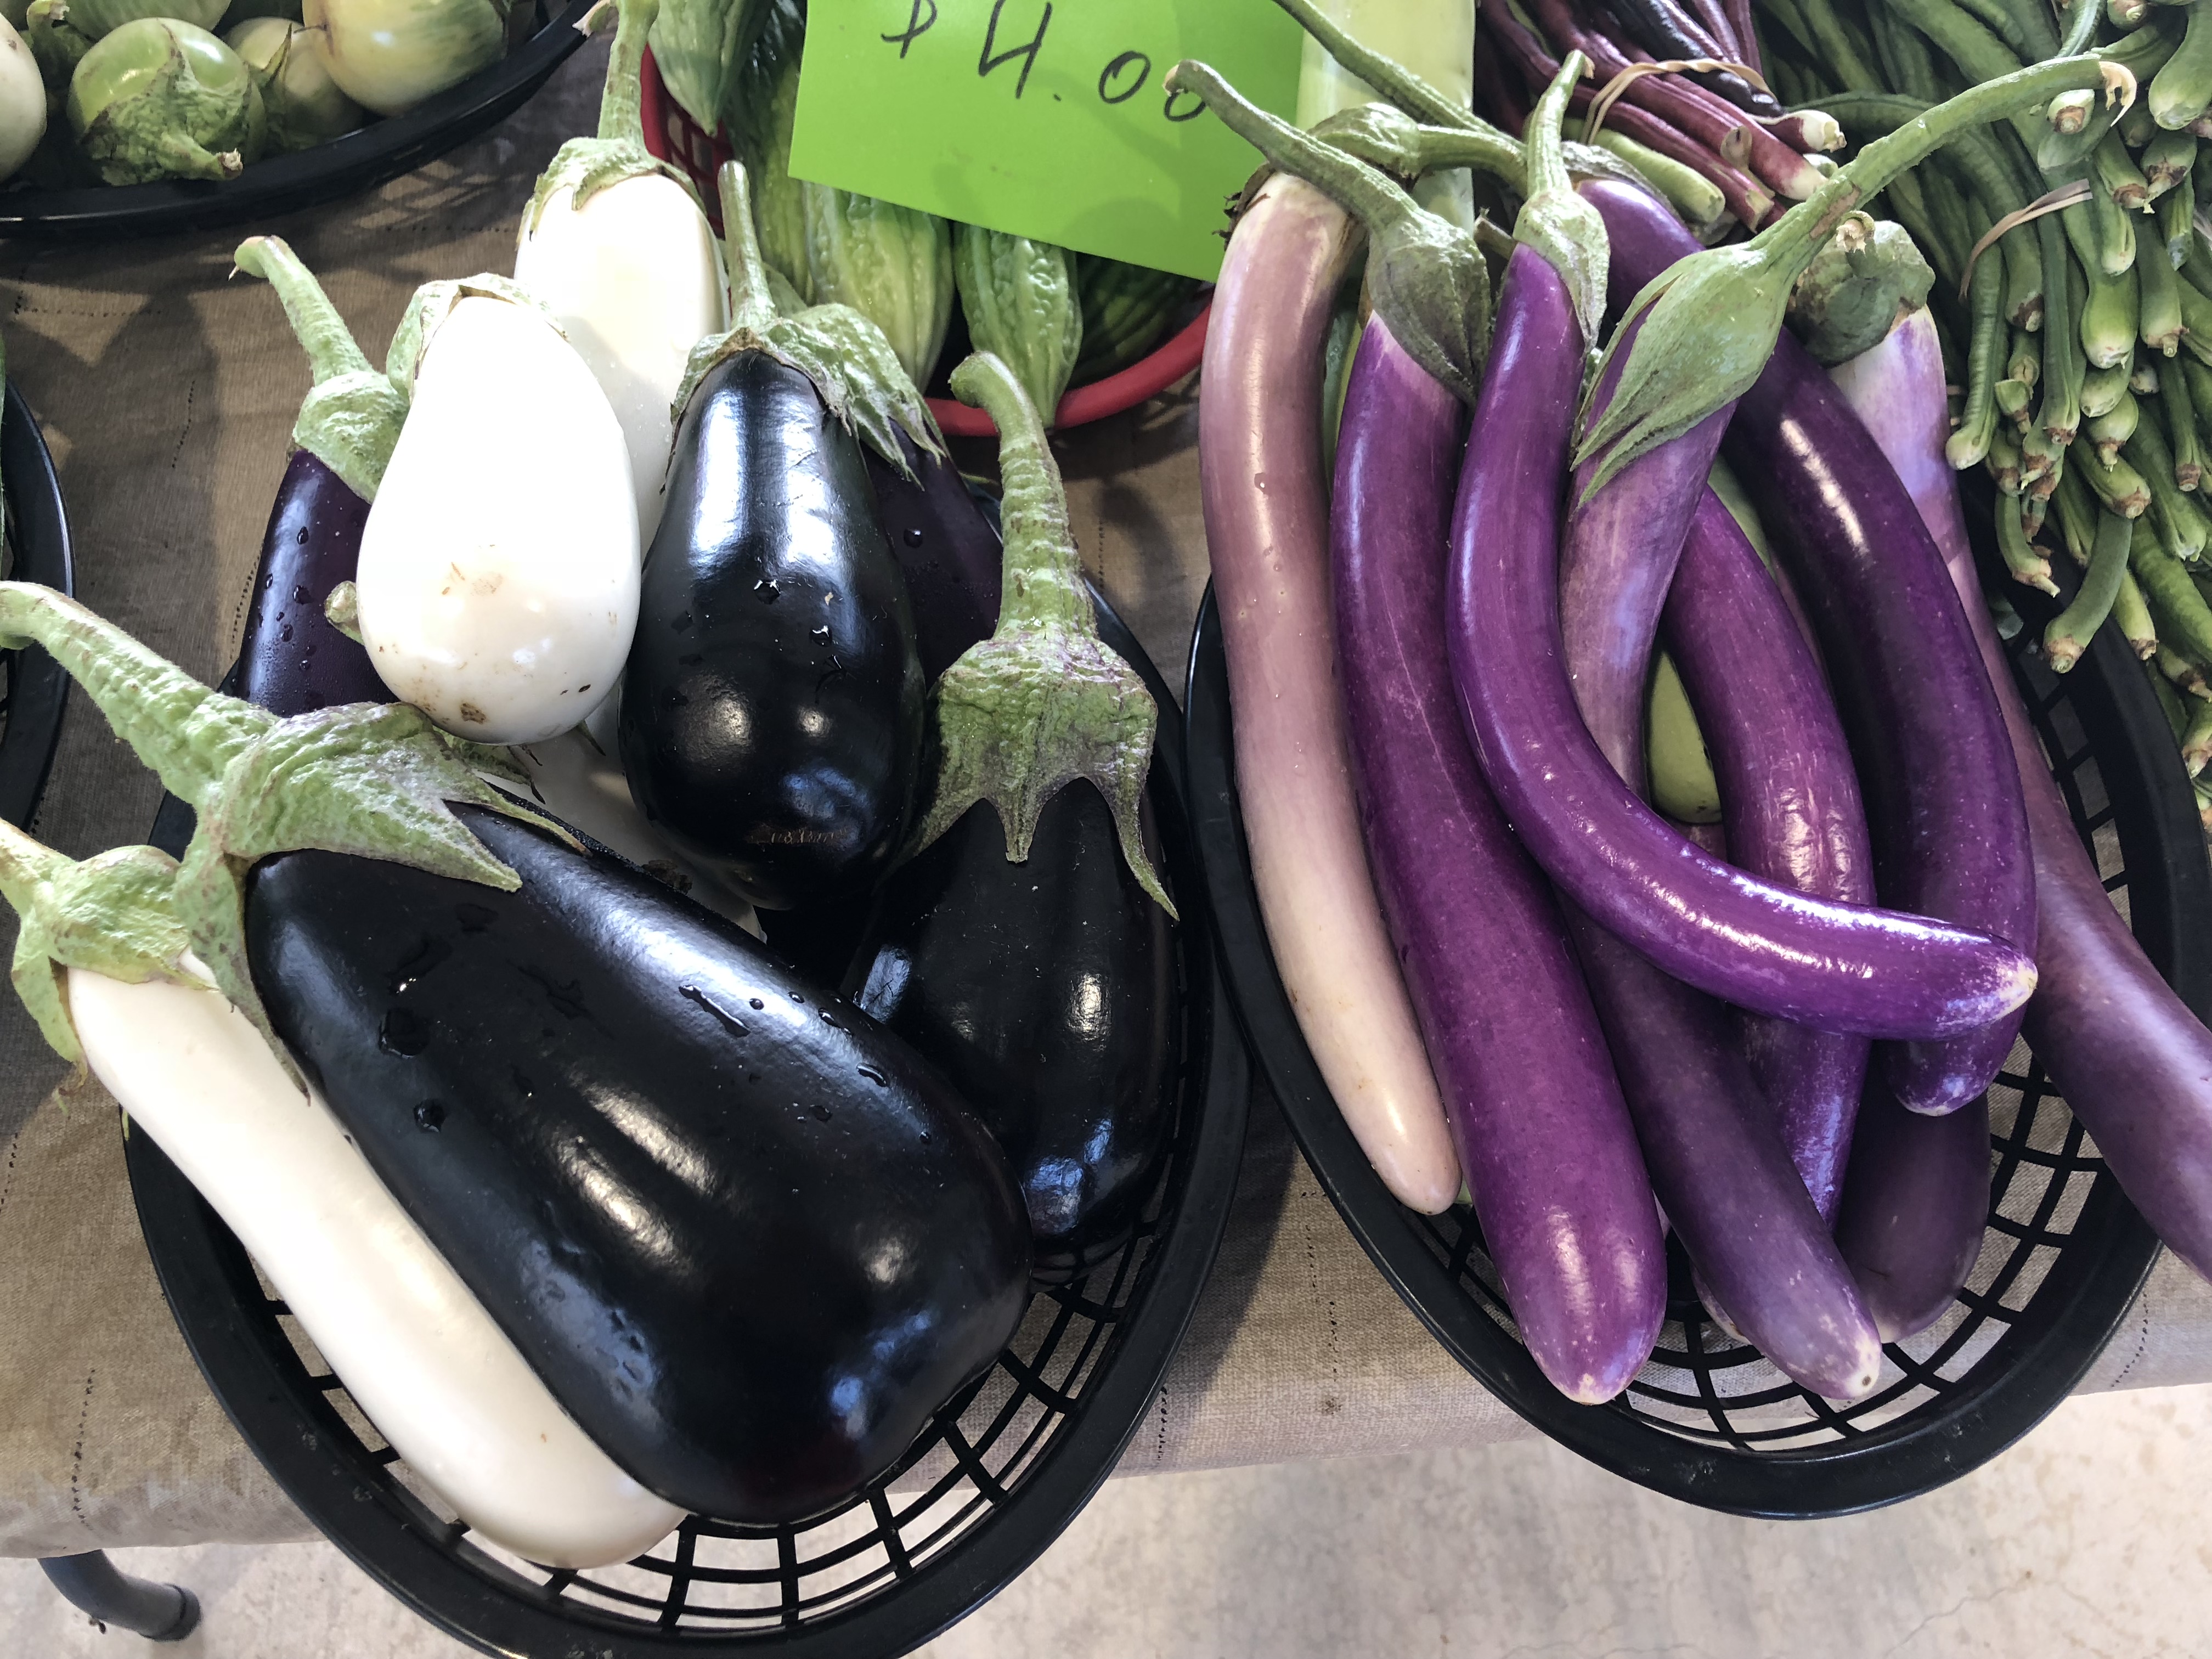 eggplants in deep purple as well as pristine white and small round green eggplant